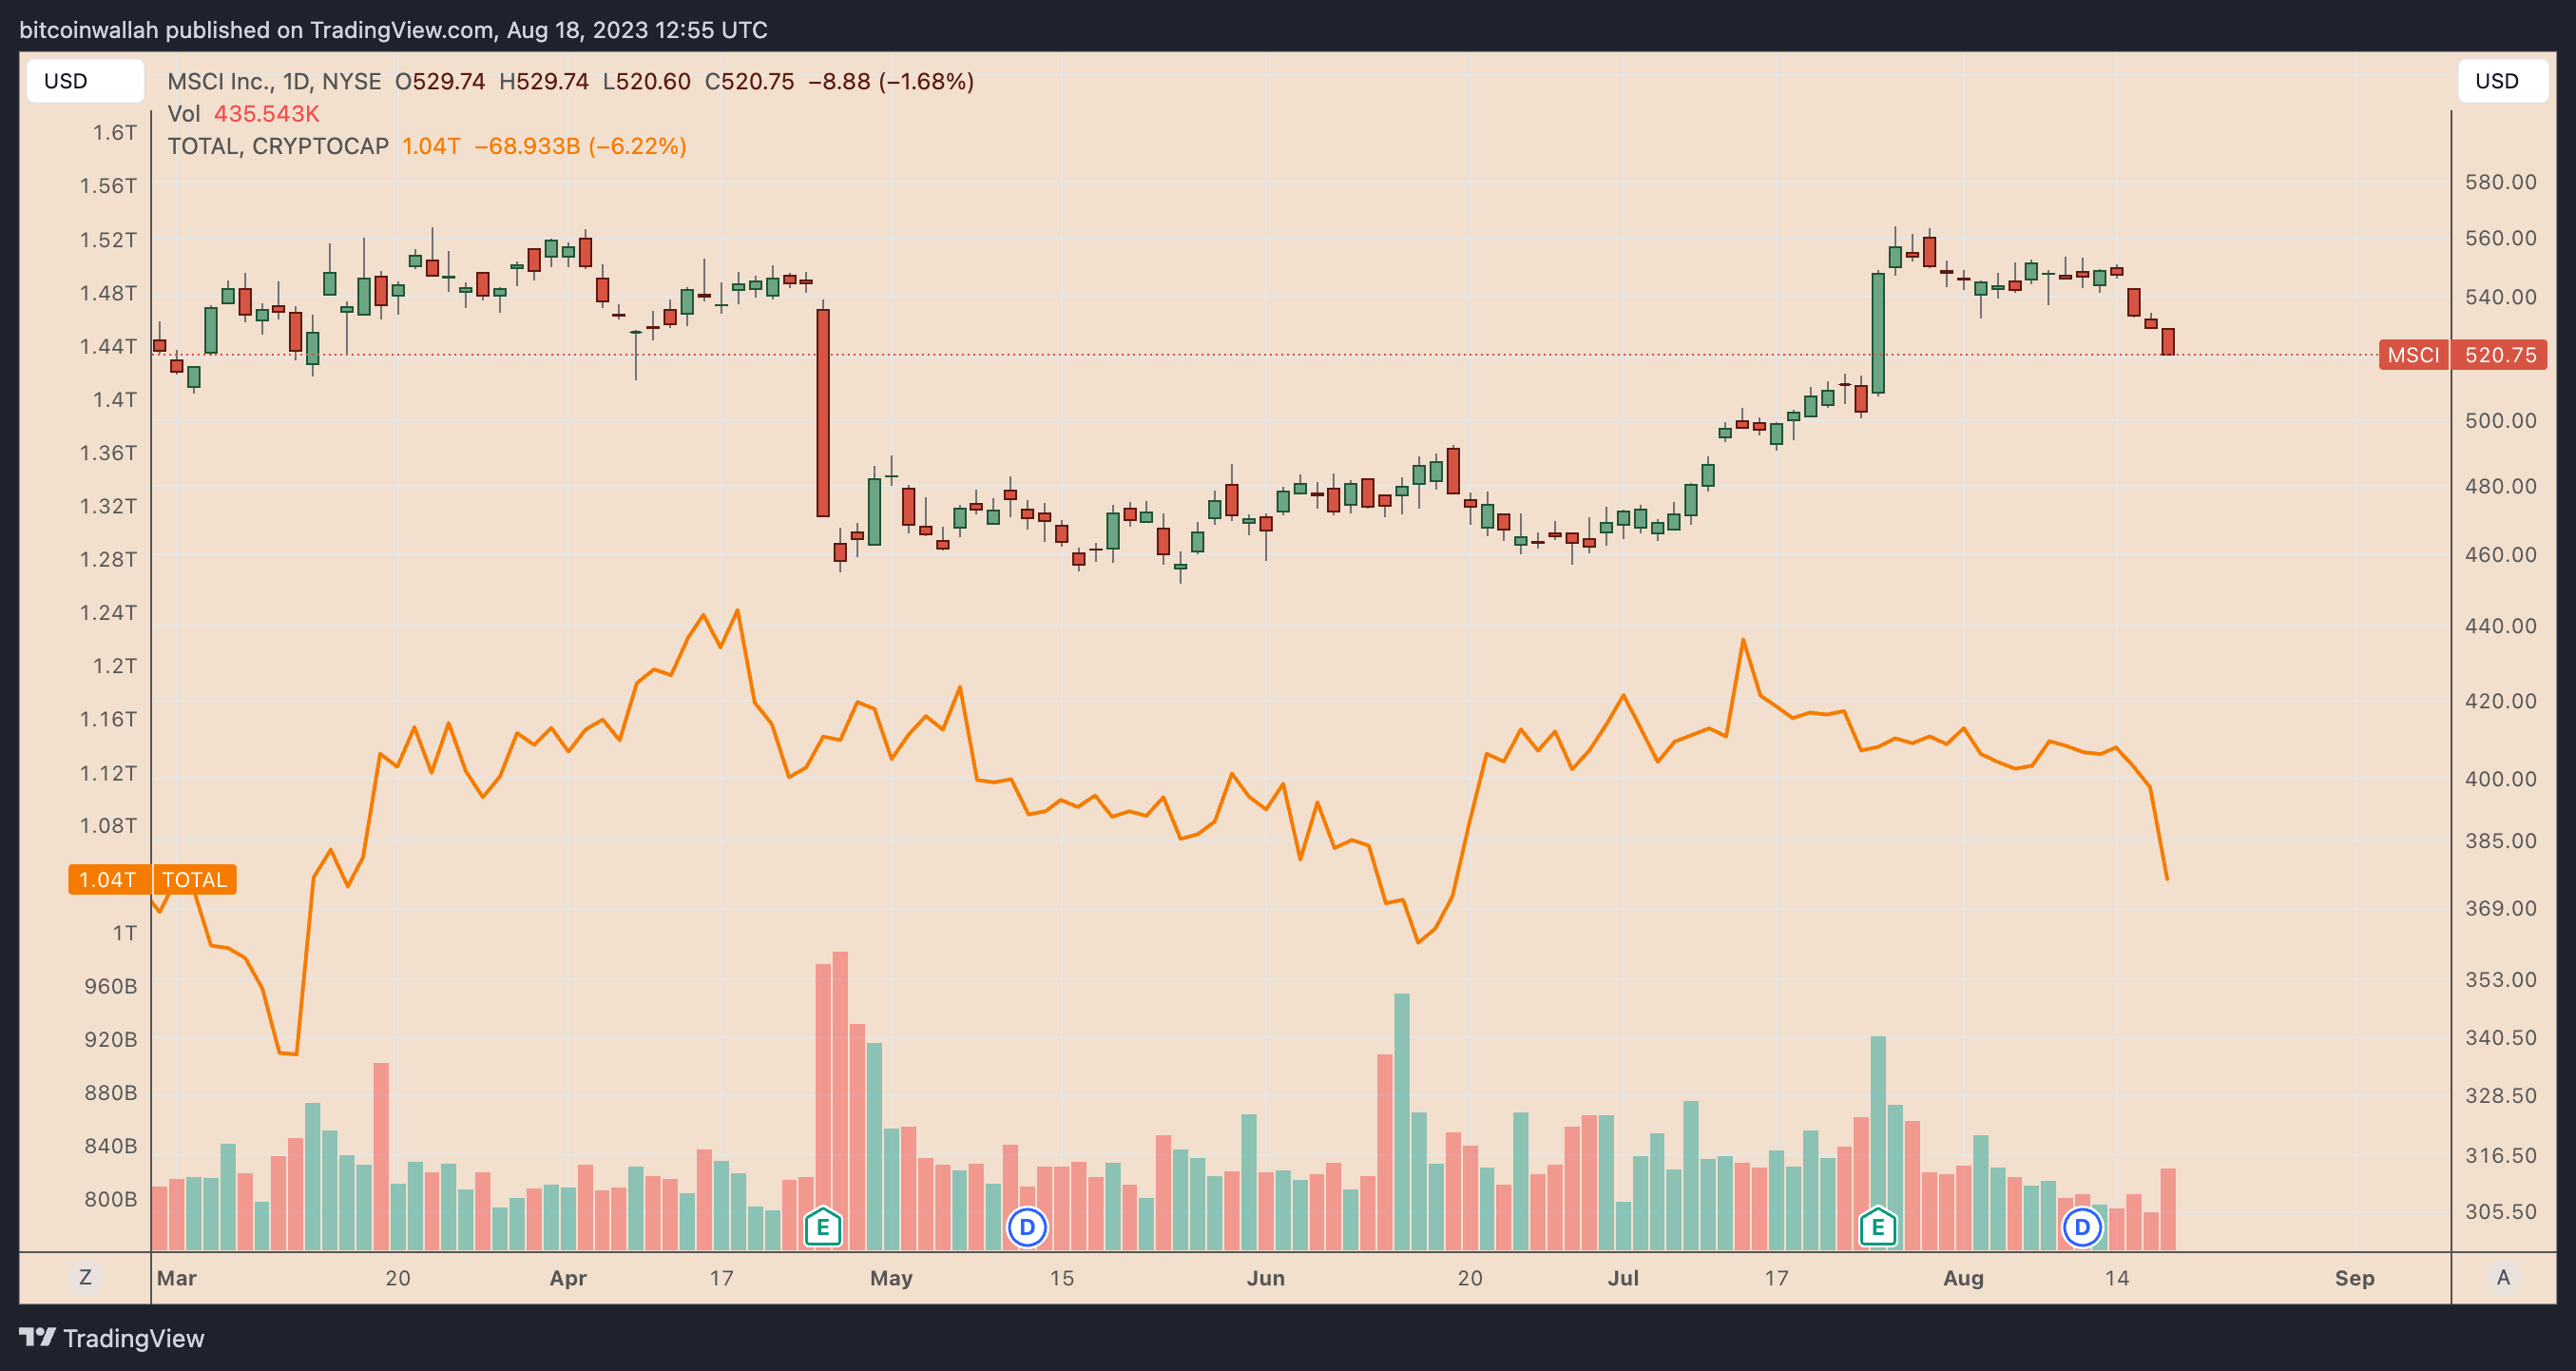 Comparison of Daily Performance Chart: MSCI vs. Cryptocurrency Market, Data Derived from TradingView Source.